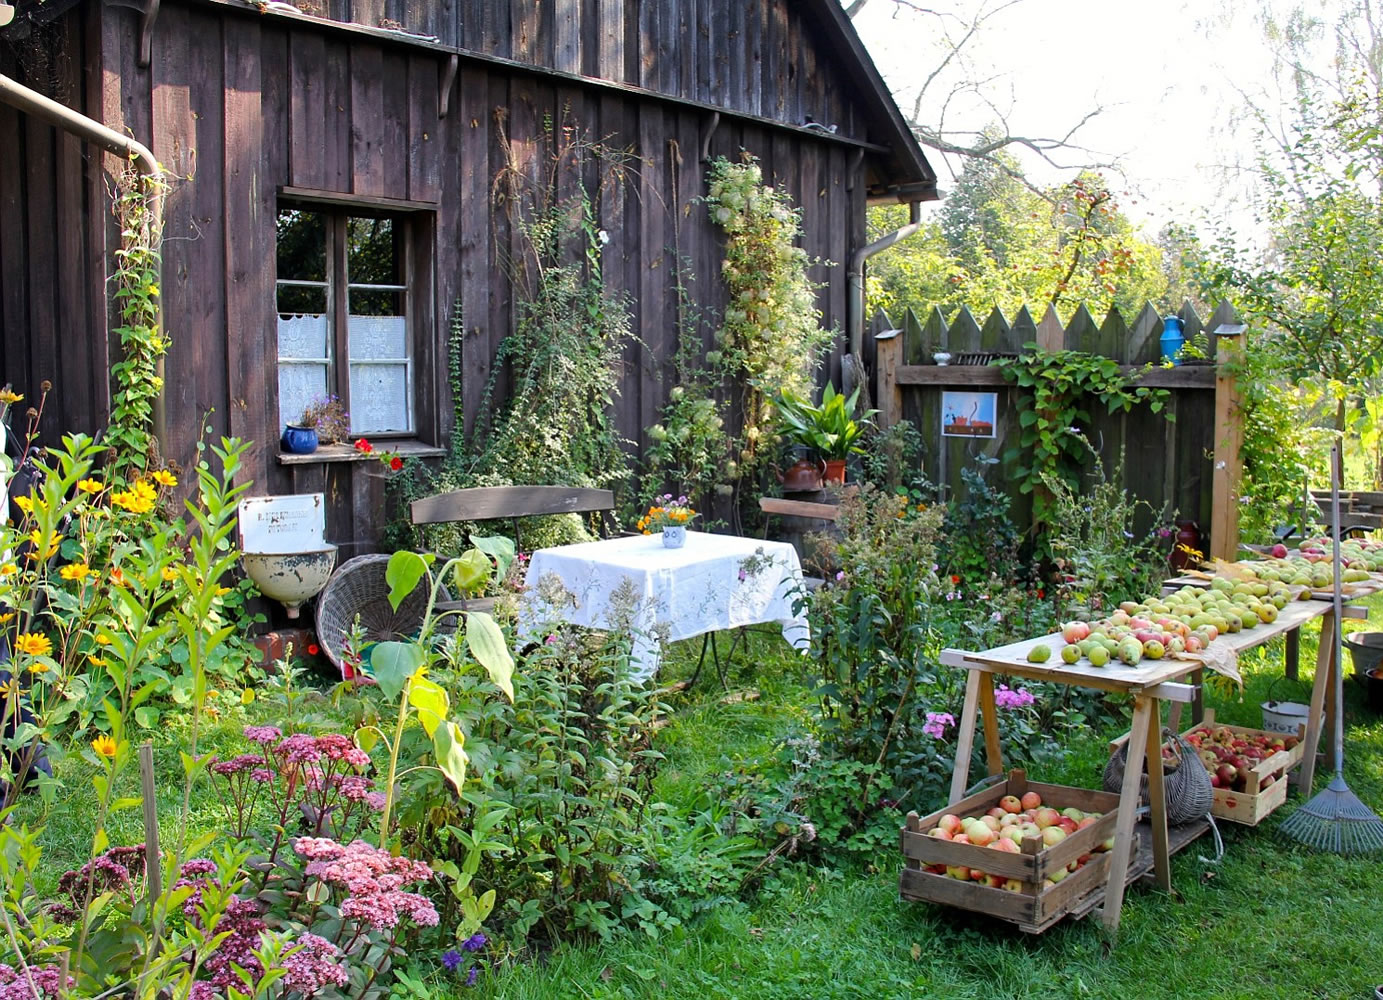 Robb Rosser
In Germany, my friend Lutz' garden was a metaphor for a fruitful, well-lived life.